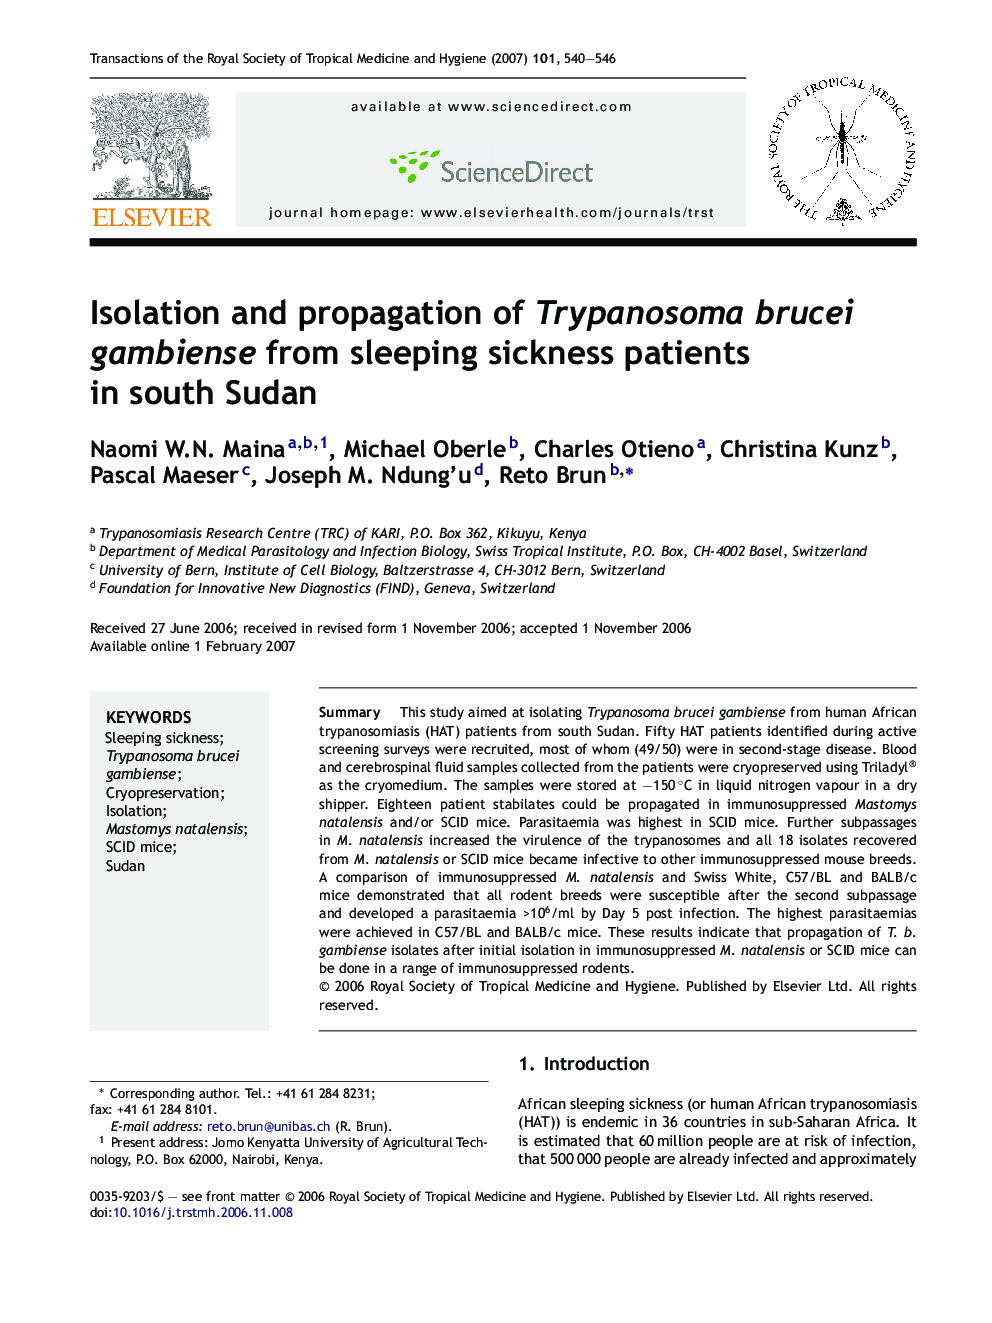 Isolation and propagation of Trypanosoma brucei gambiense from sleeping sickness patients in south Sudan